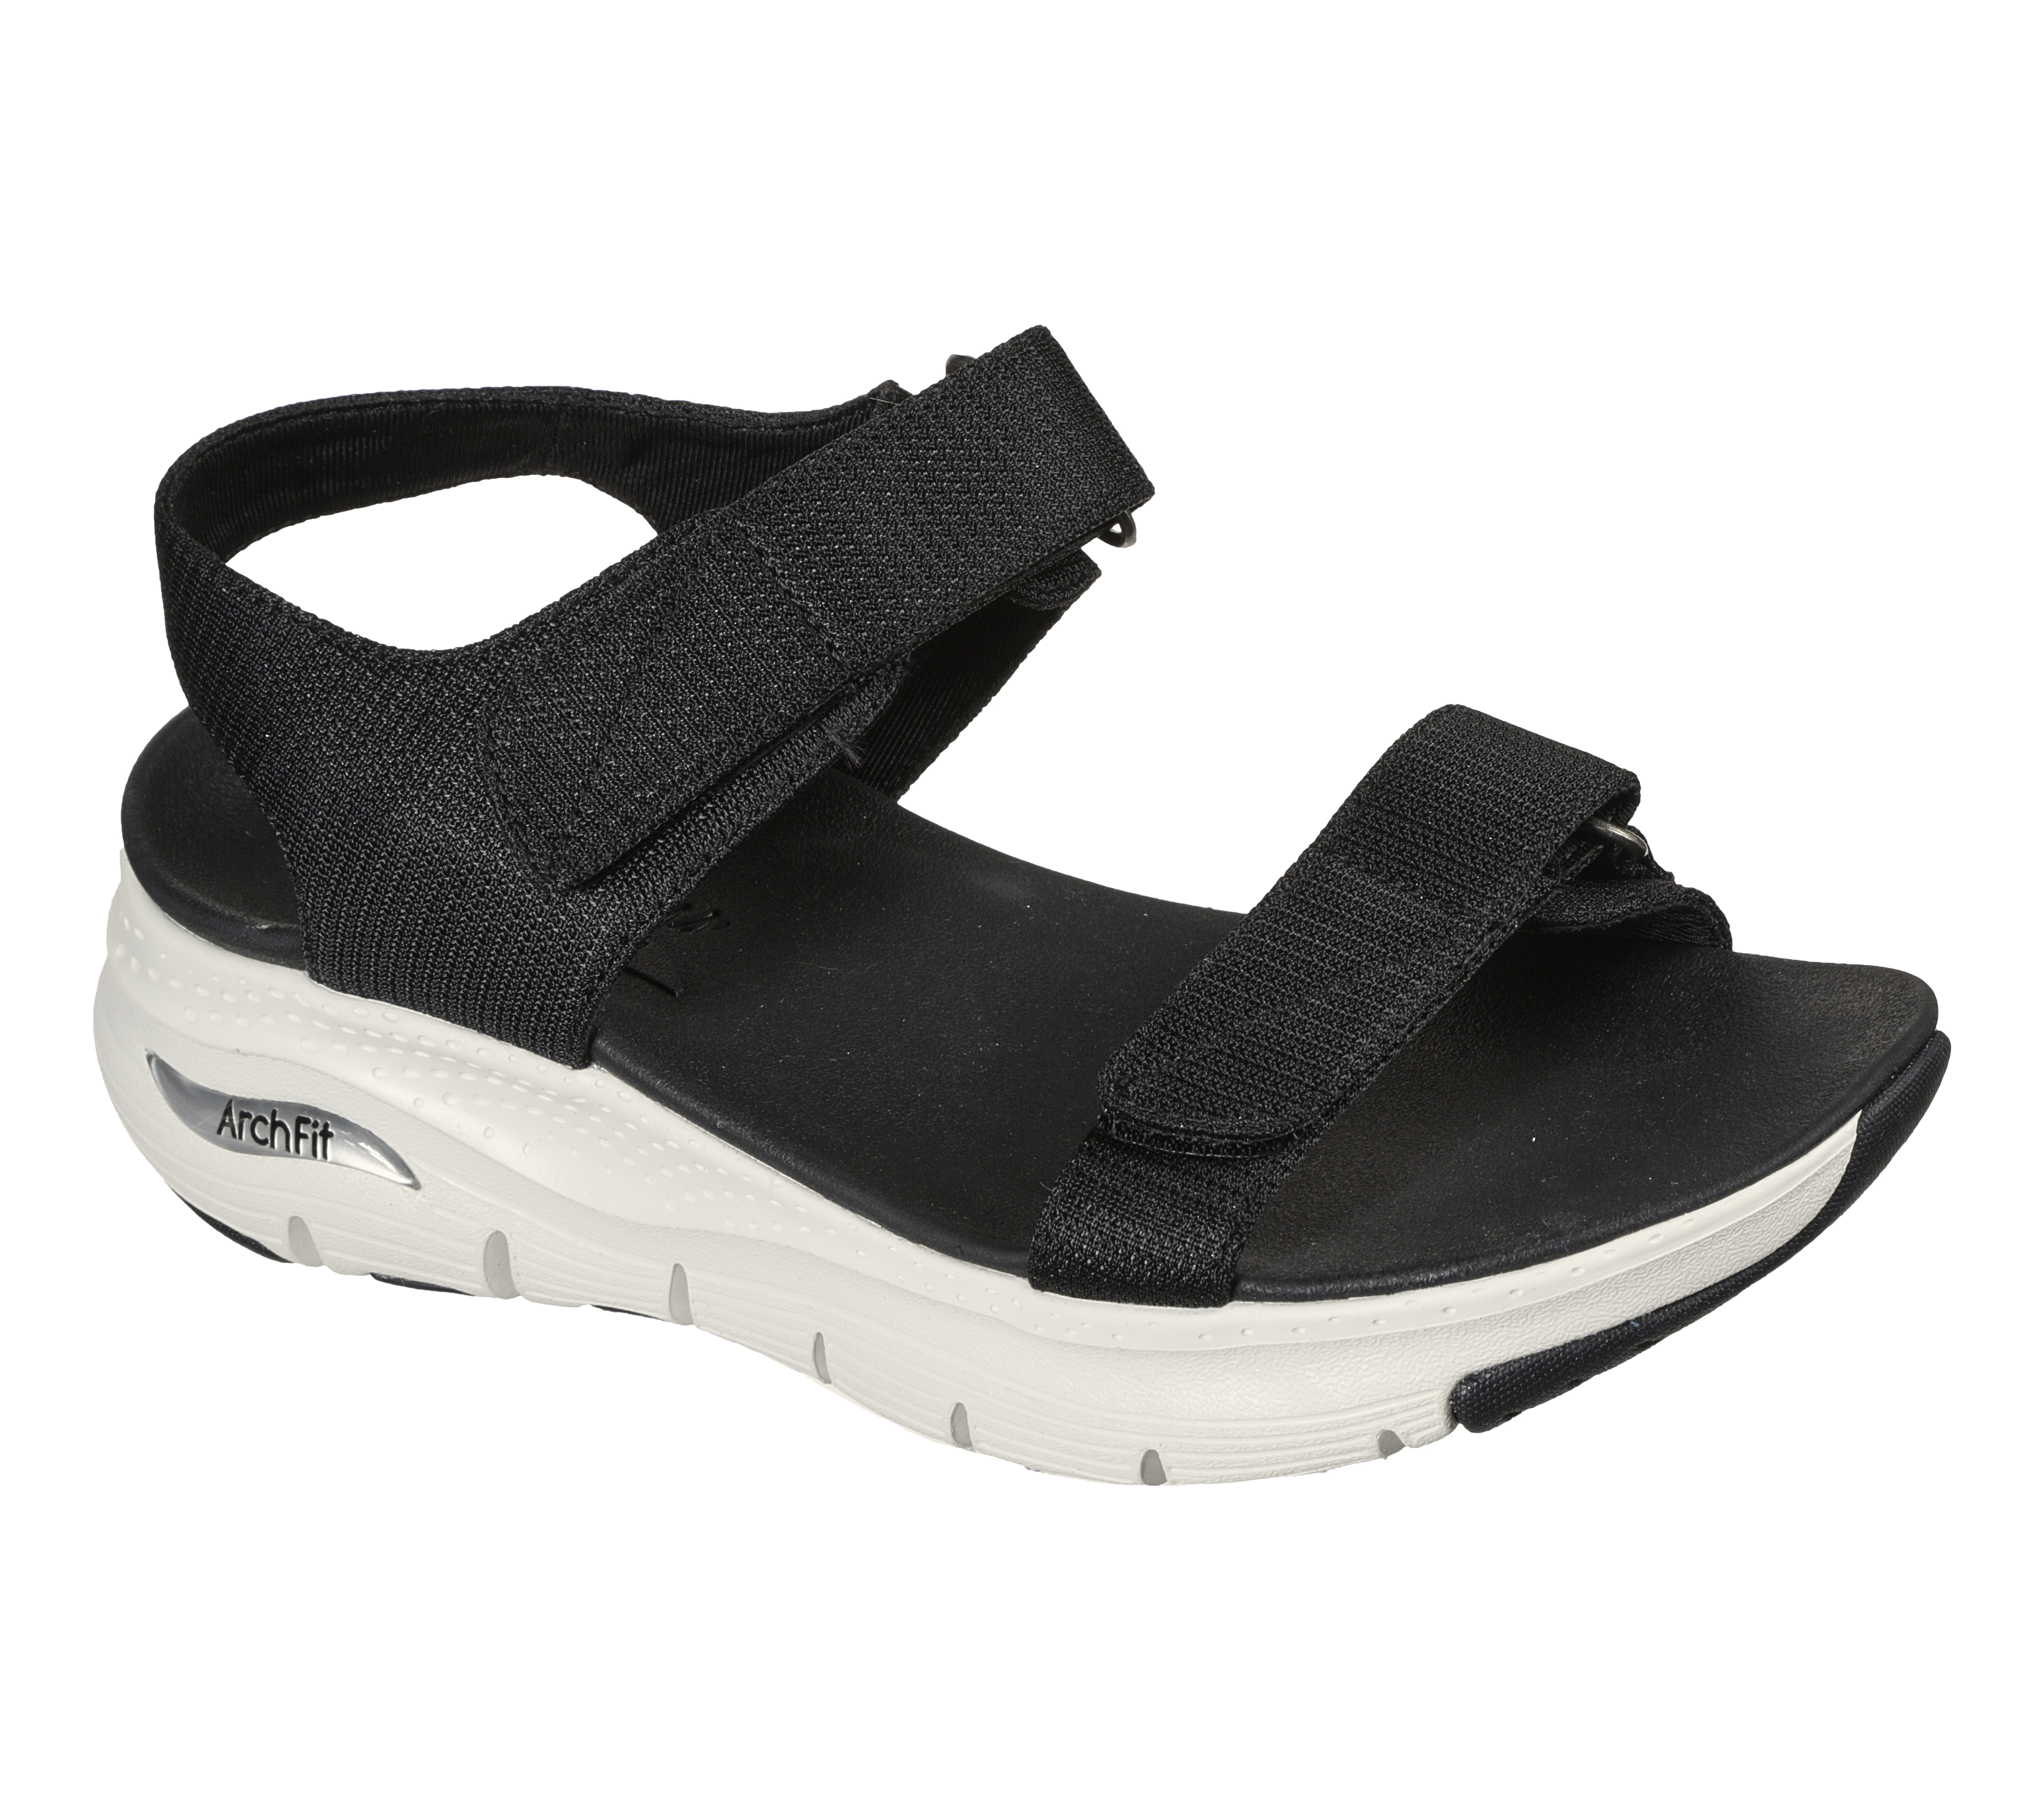 Skechers Arch Fit - Touristy